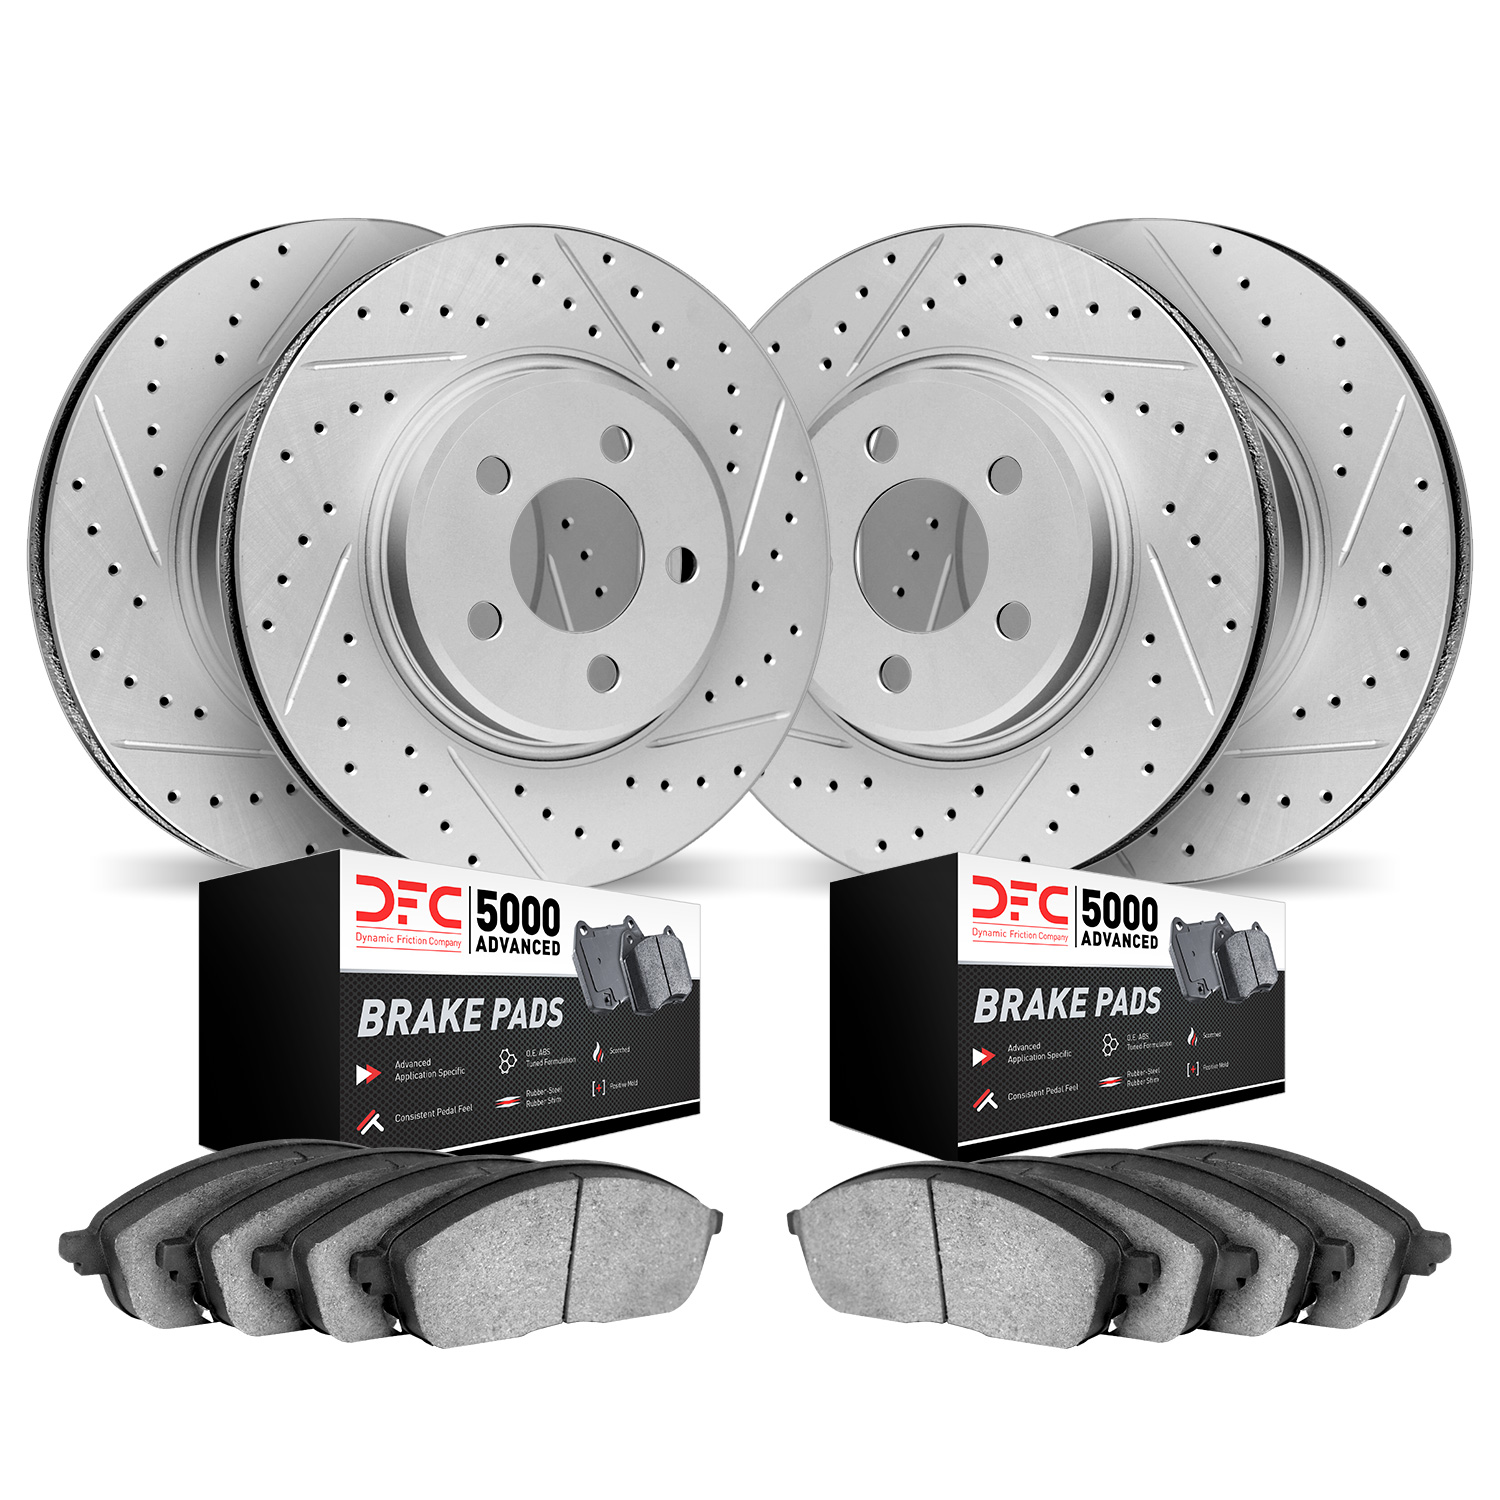 2504-67062 Geoperformance Drilled/Slotted Rotors w/5000 Advanced Brake Pads Kit, 2006-2020 Infiniti/Nissan, Position: Front and